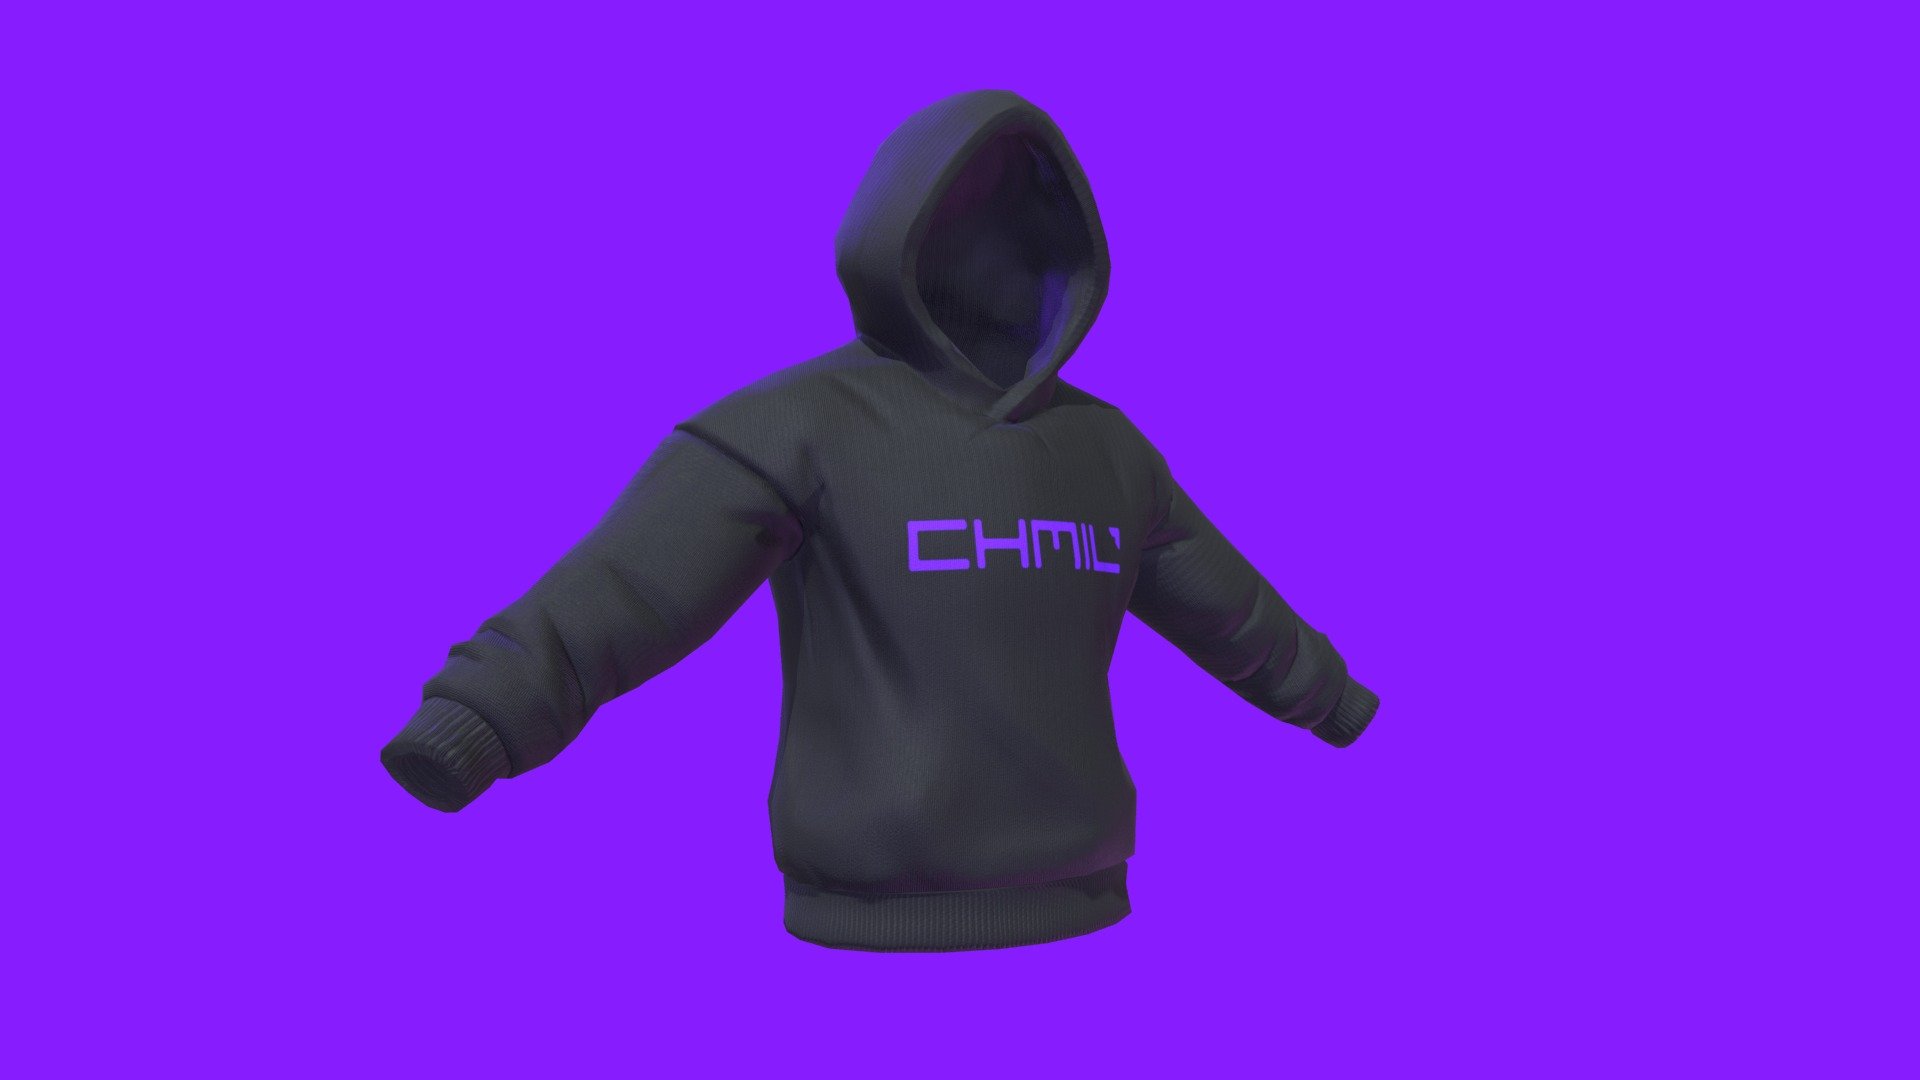 A Game-Ready Stylized Hoodie. The Model is Retopped, UV Unwrapped, Baked and Ready to use in Unity, Unreal Engine or any other software. Have fun dressing your characters!

No need to learn sculpting, retopping, baking, texturing, fashion design and human anatomy - I save you months if not years of time by providing a complete solution! I've done all the routine work for you, so you can get straight to 3D Animation! 

Brought to you by your №1 Metaverse Fashion Brand CHMIL

Keep the original design in your works and show everyone that you are a part of our Cyber Fashion Movement!

DM if you need a specific design.

Thank you for your trust and support!




Erik
 - Hoodie Fortnite Style GAME READY - Buy Royalty Free 3D model by CHMIL Studio (@chmilstudio) 3d model